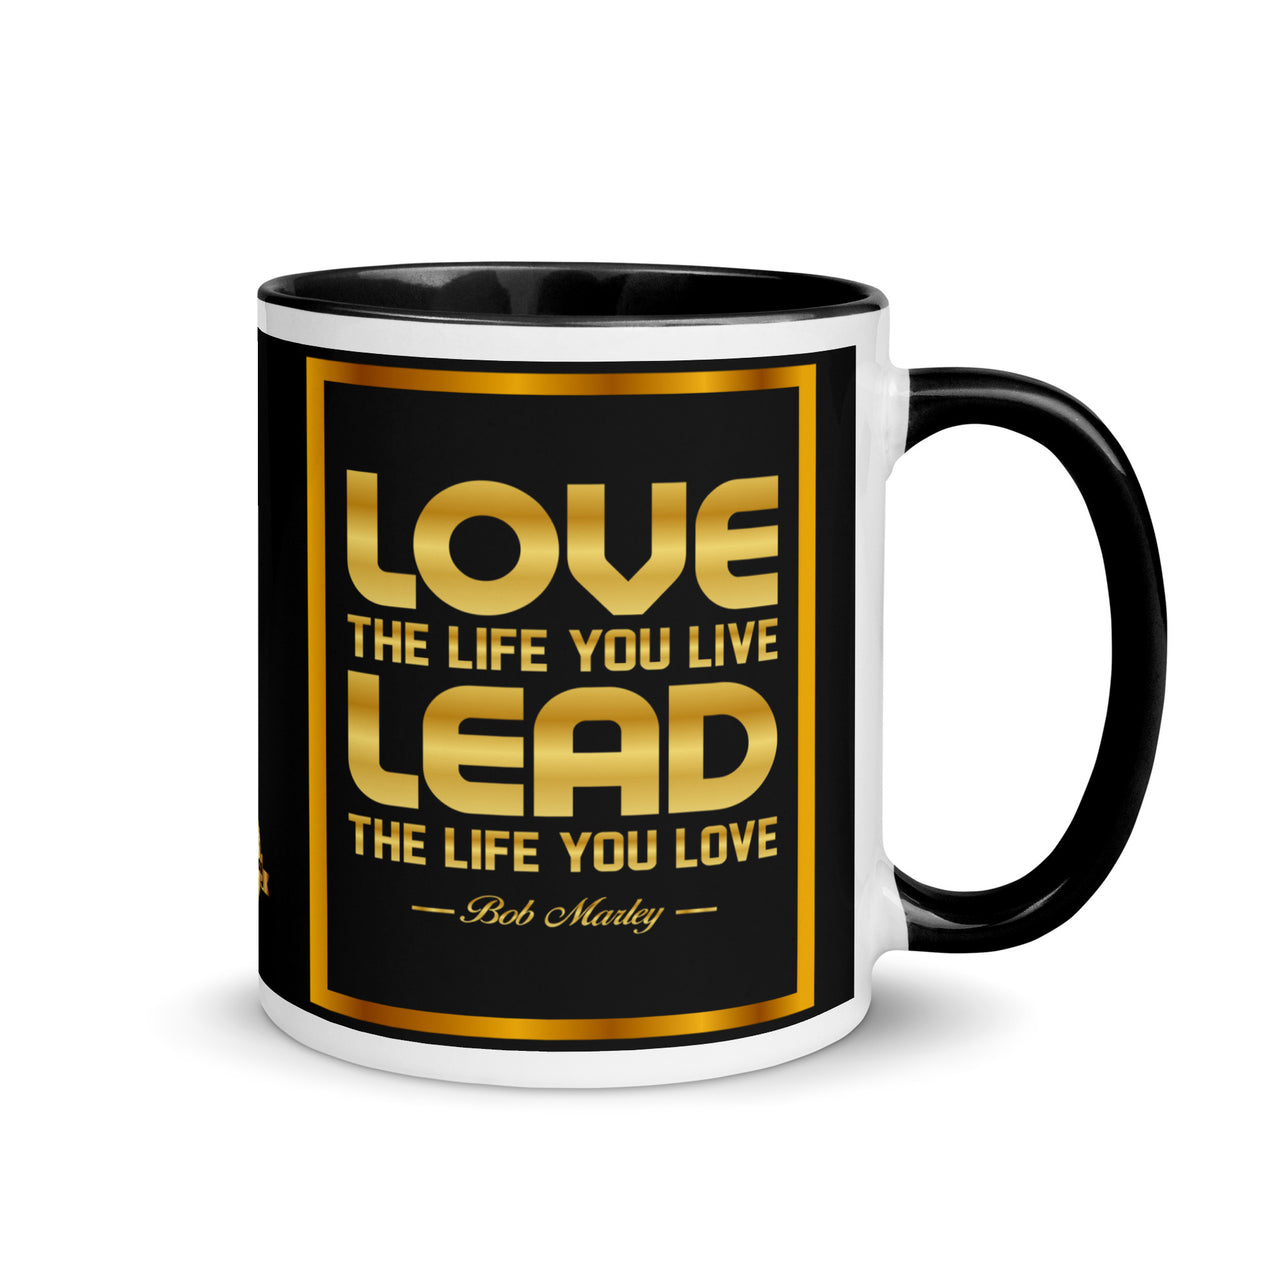 Love the Life You Live - Bob Marley Quote - 11oz Motivational Graphic Colored Coffee Mug